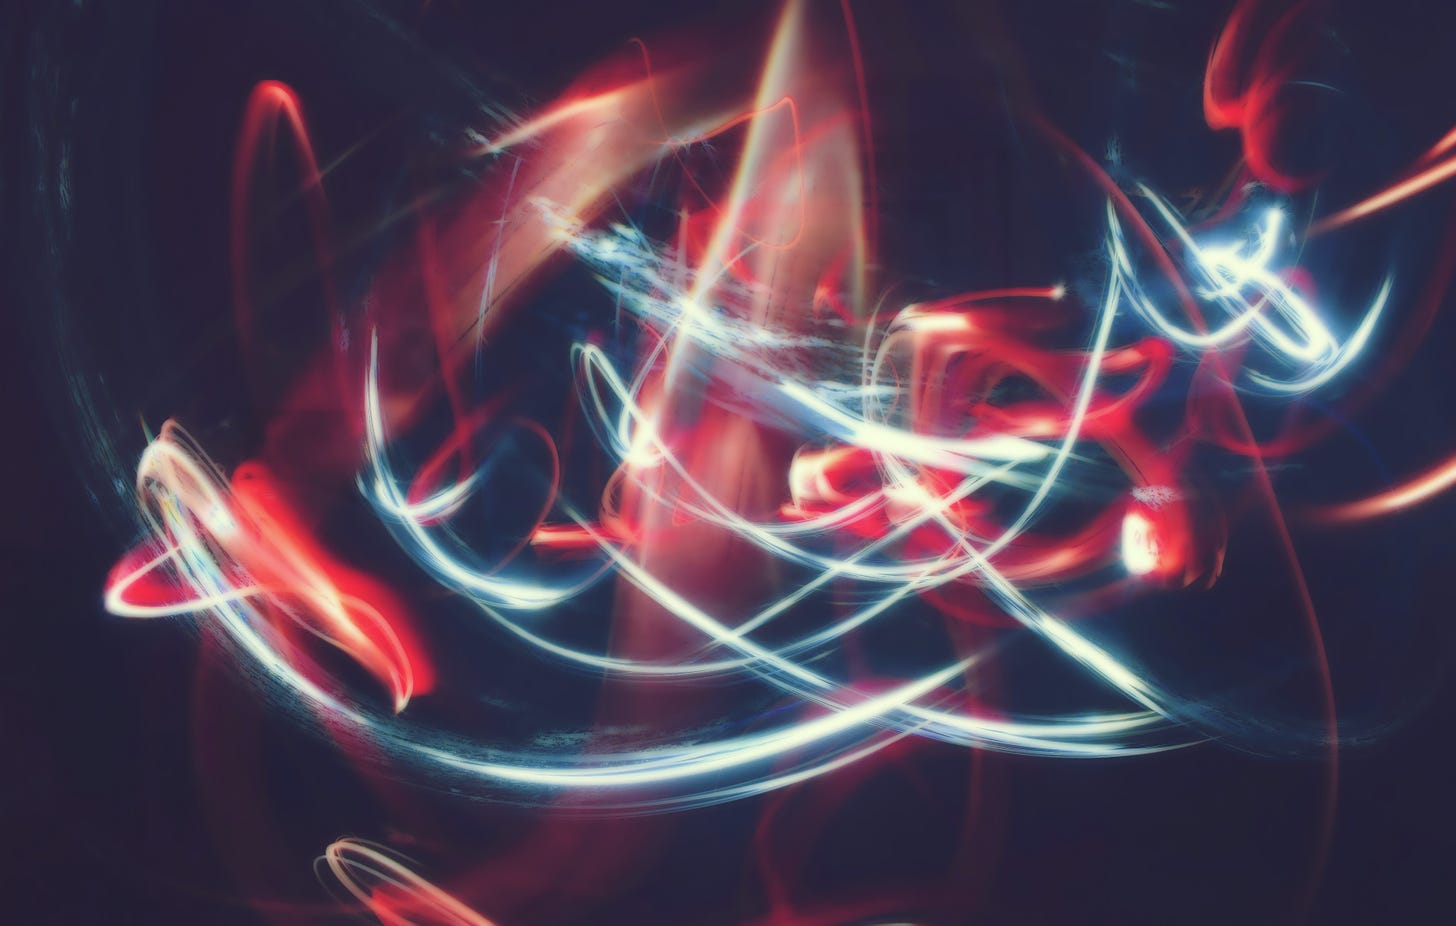 Swirling red and white lights by Admad Dirini on Unsplash.